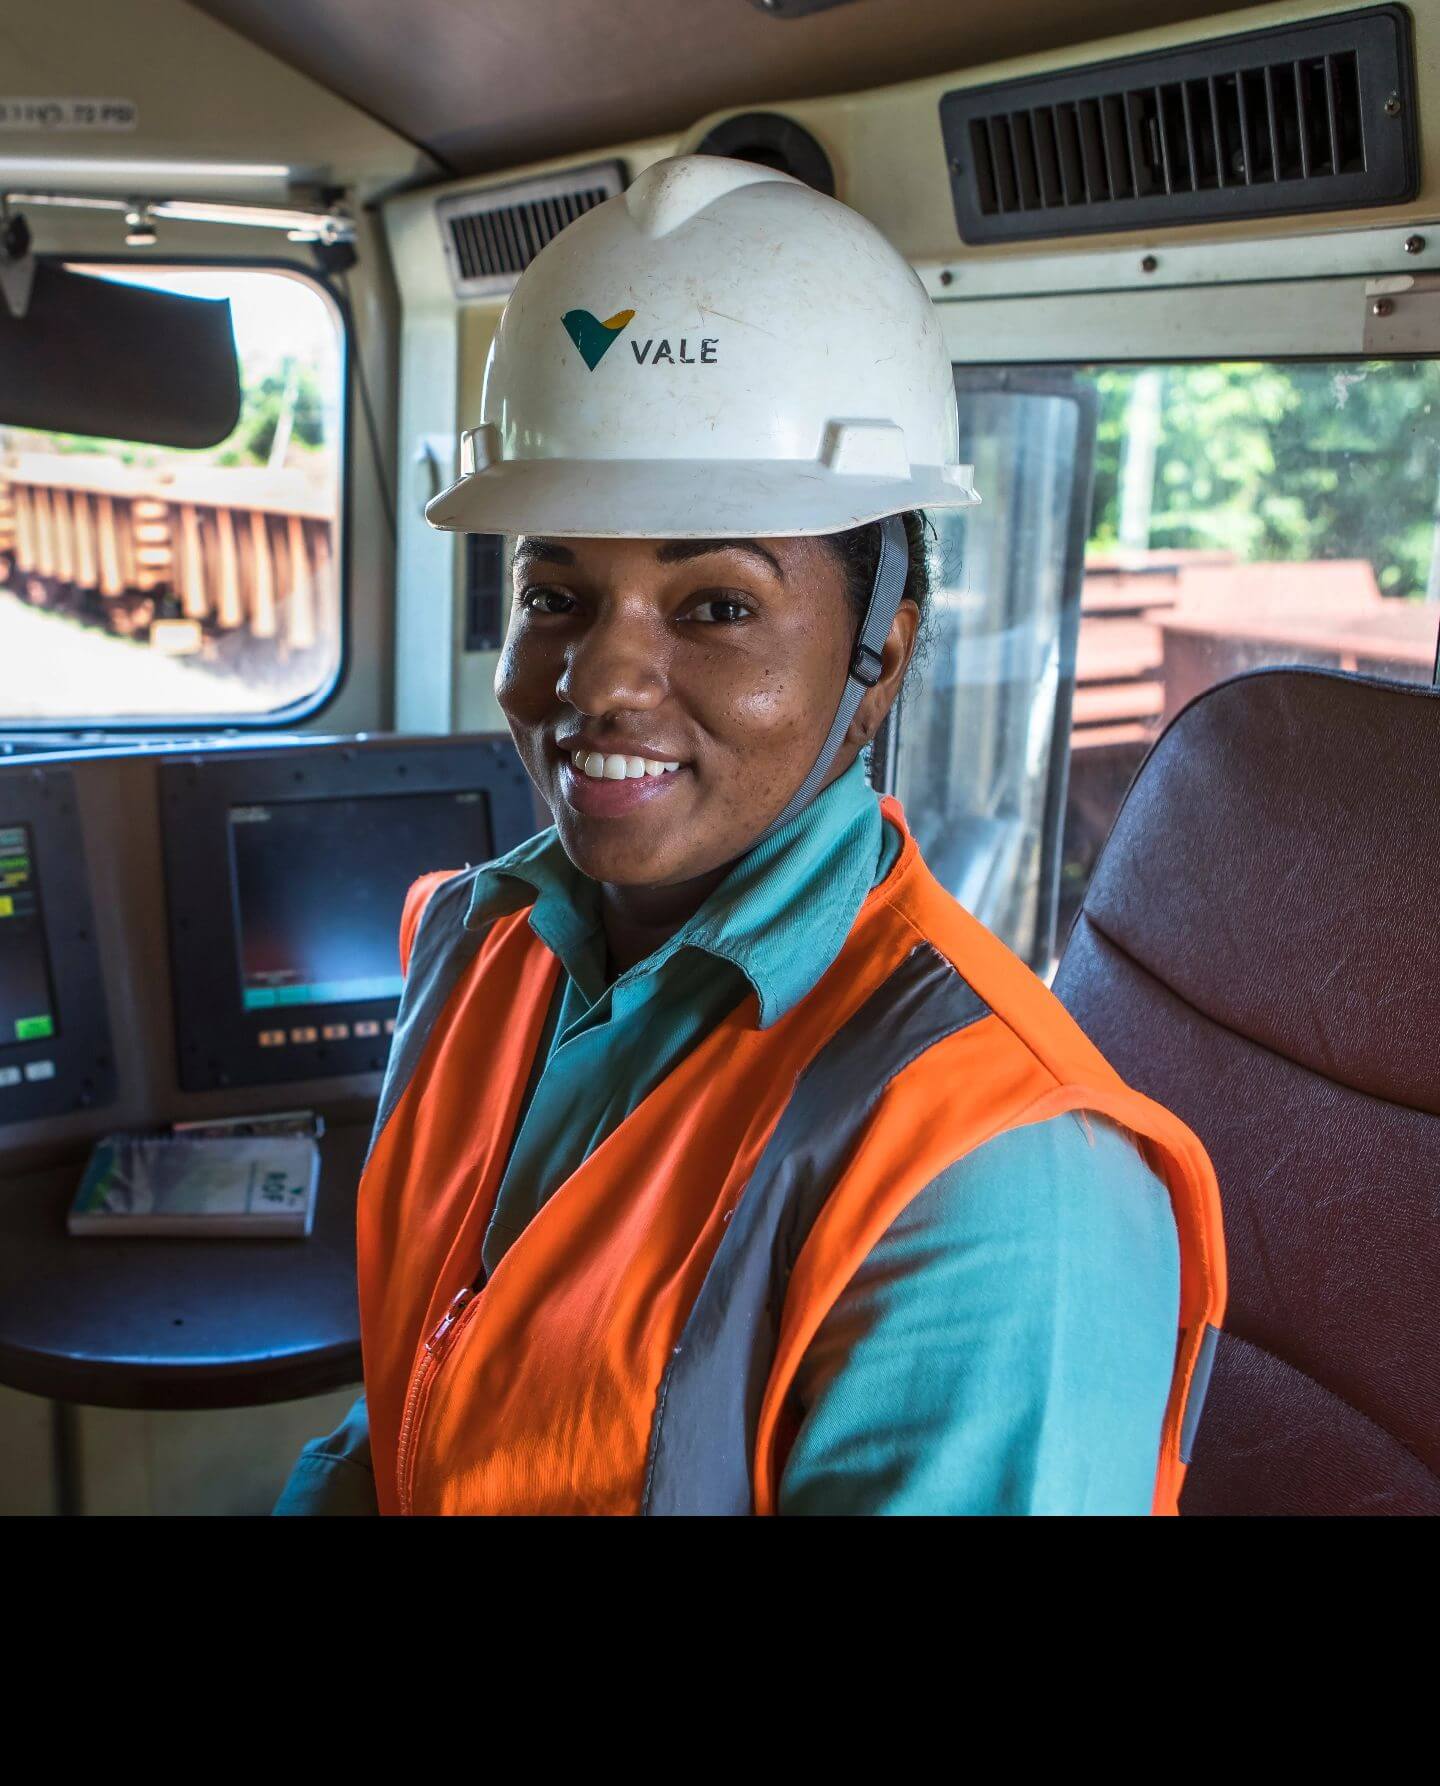 A black woman smiling inside a vehicle. She is wearing green Vale uniform, an orange vest and a white helmet with the company logo.